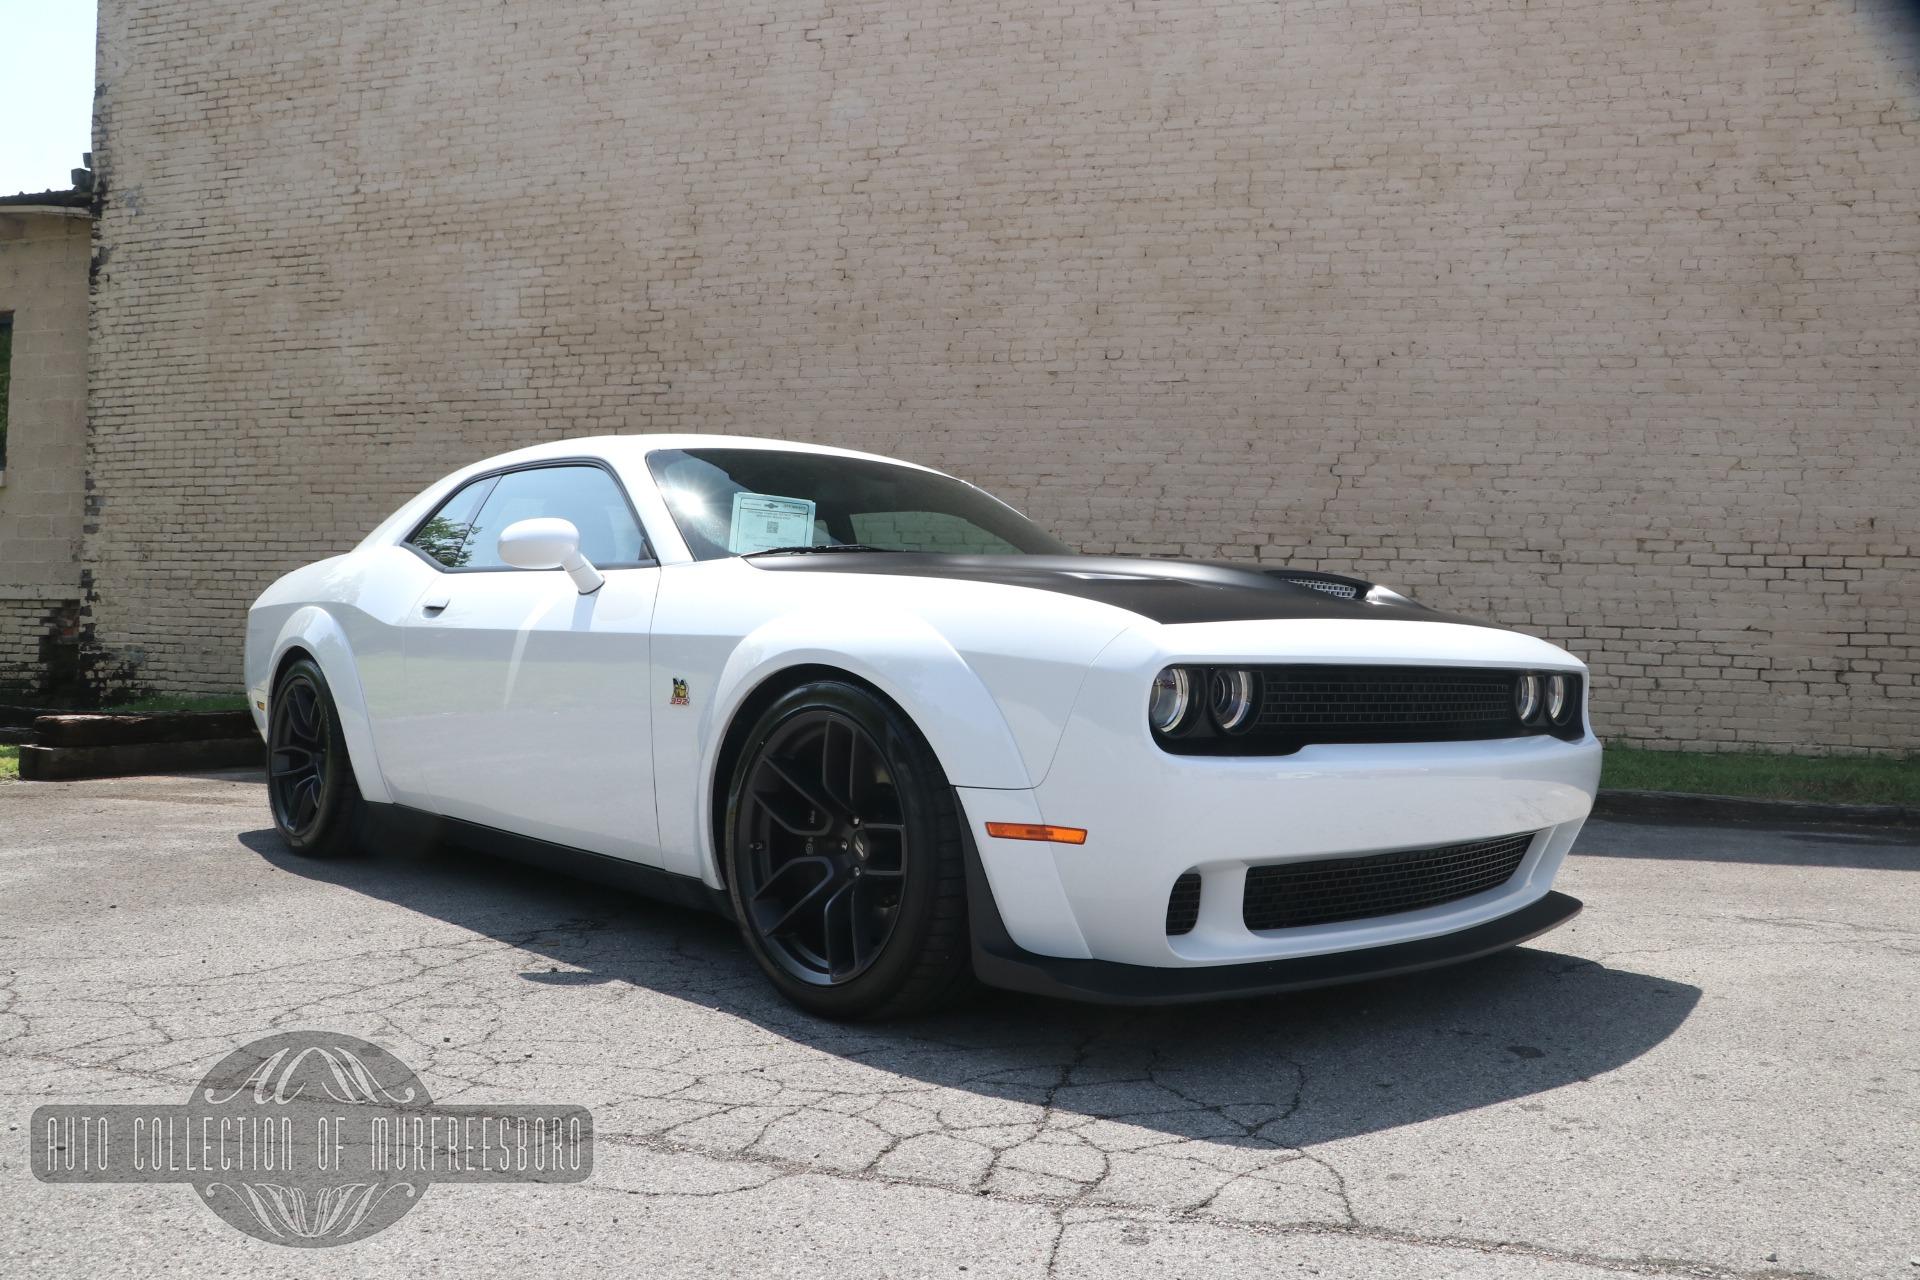 Used 2020 Dodge Challenger R/T SCAT PACK WIDEBODY W/SUN ROOF for sale $52,660 at Auto Collection in Murfreesboro TN 37129 1